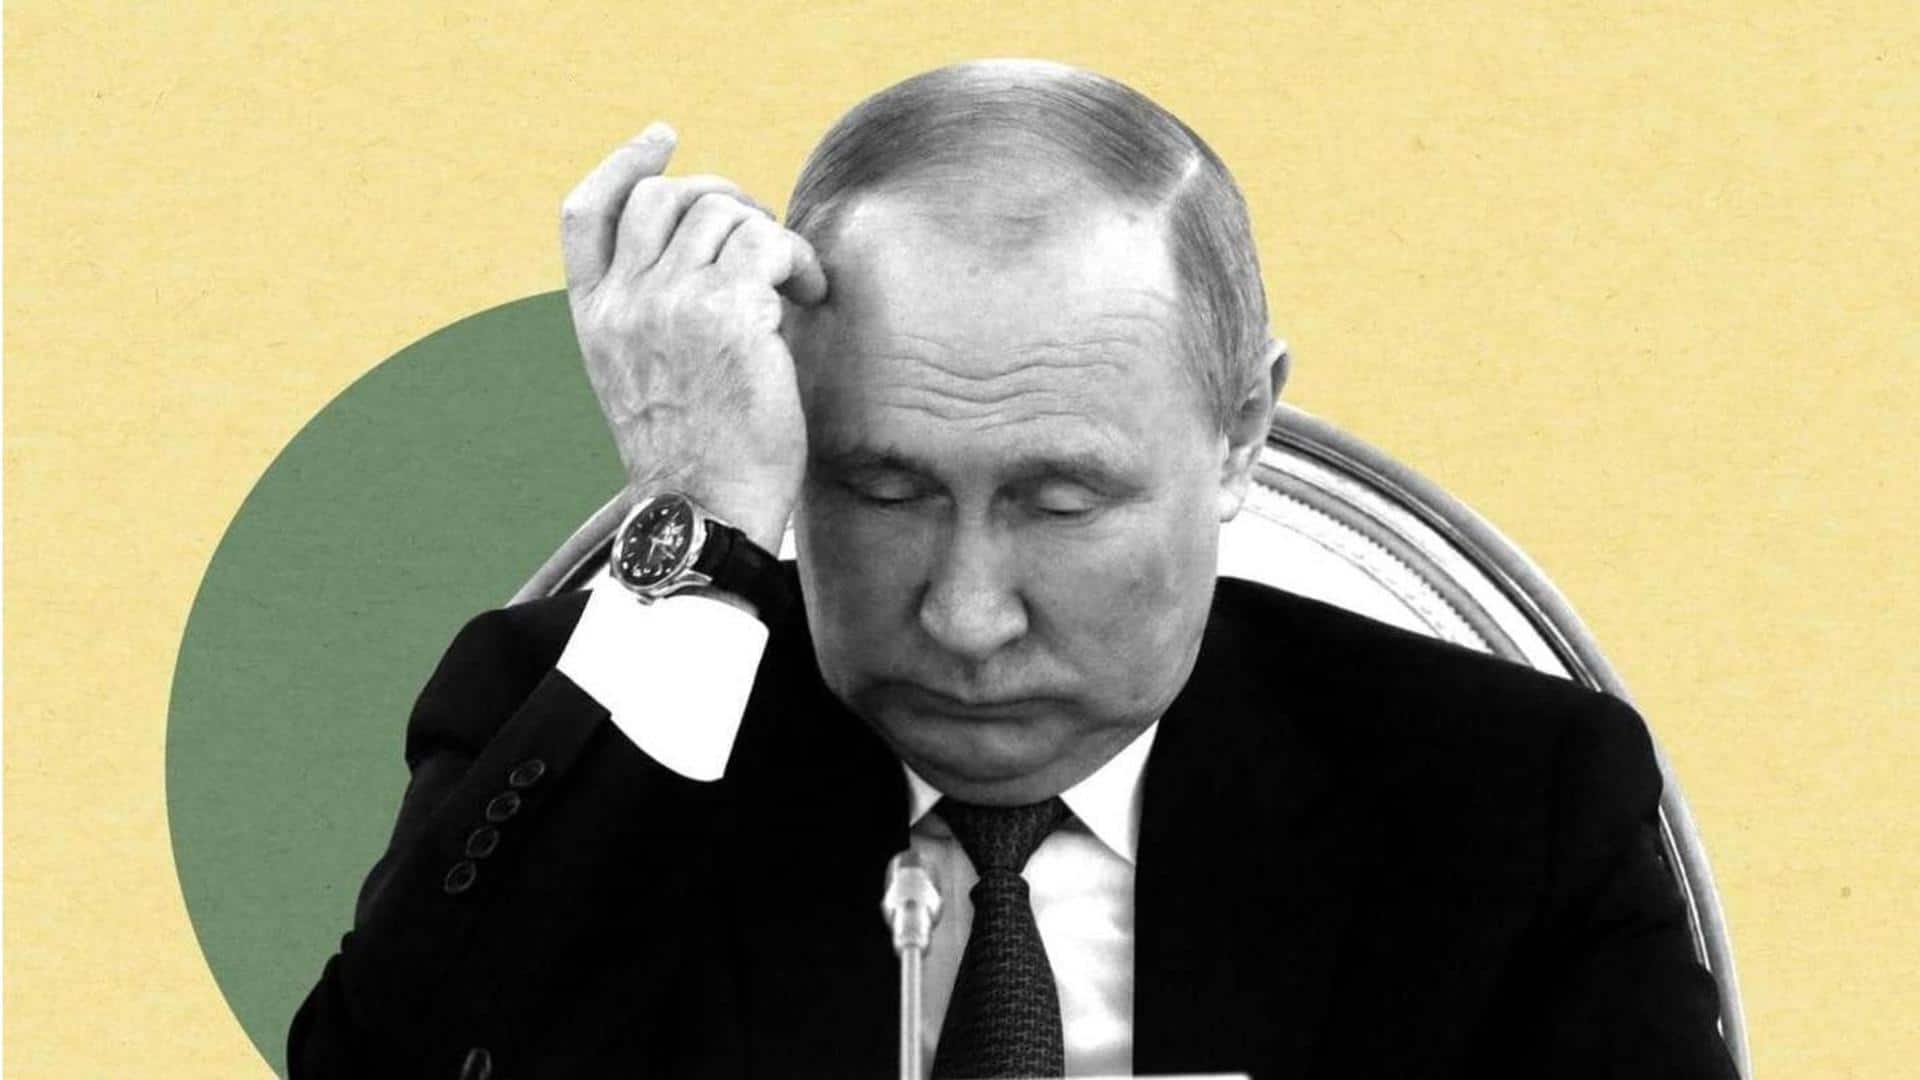 Arrest warrant issued against Putin, but can he be apprehended